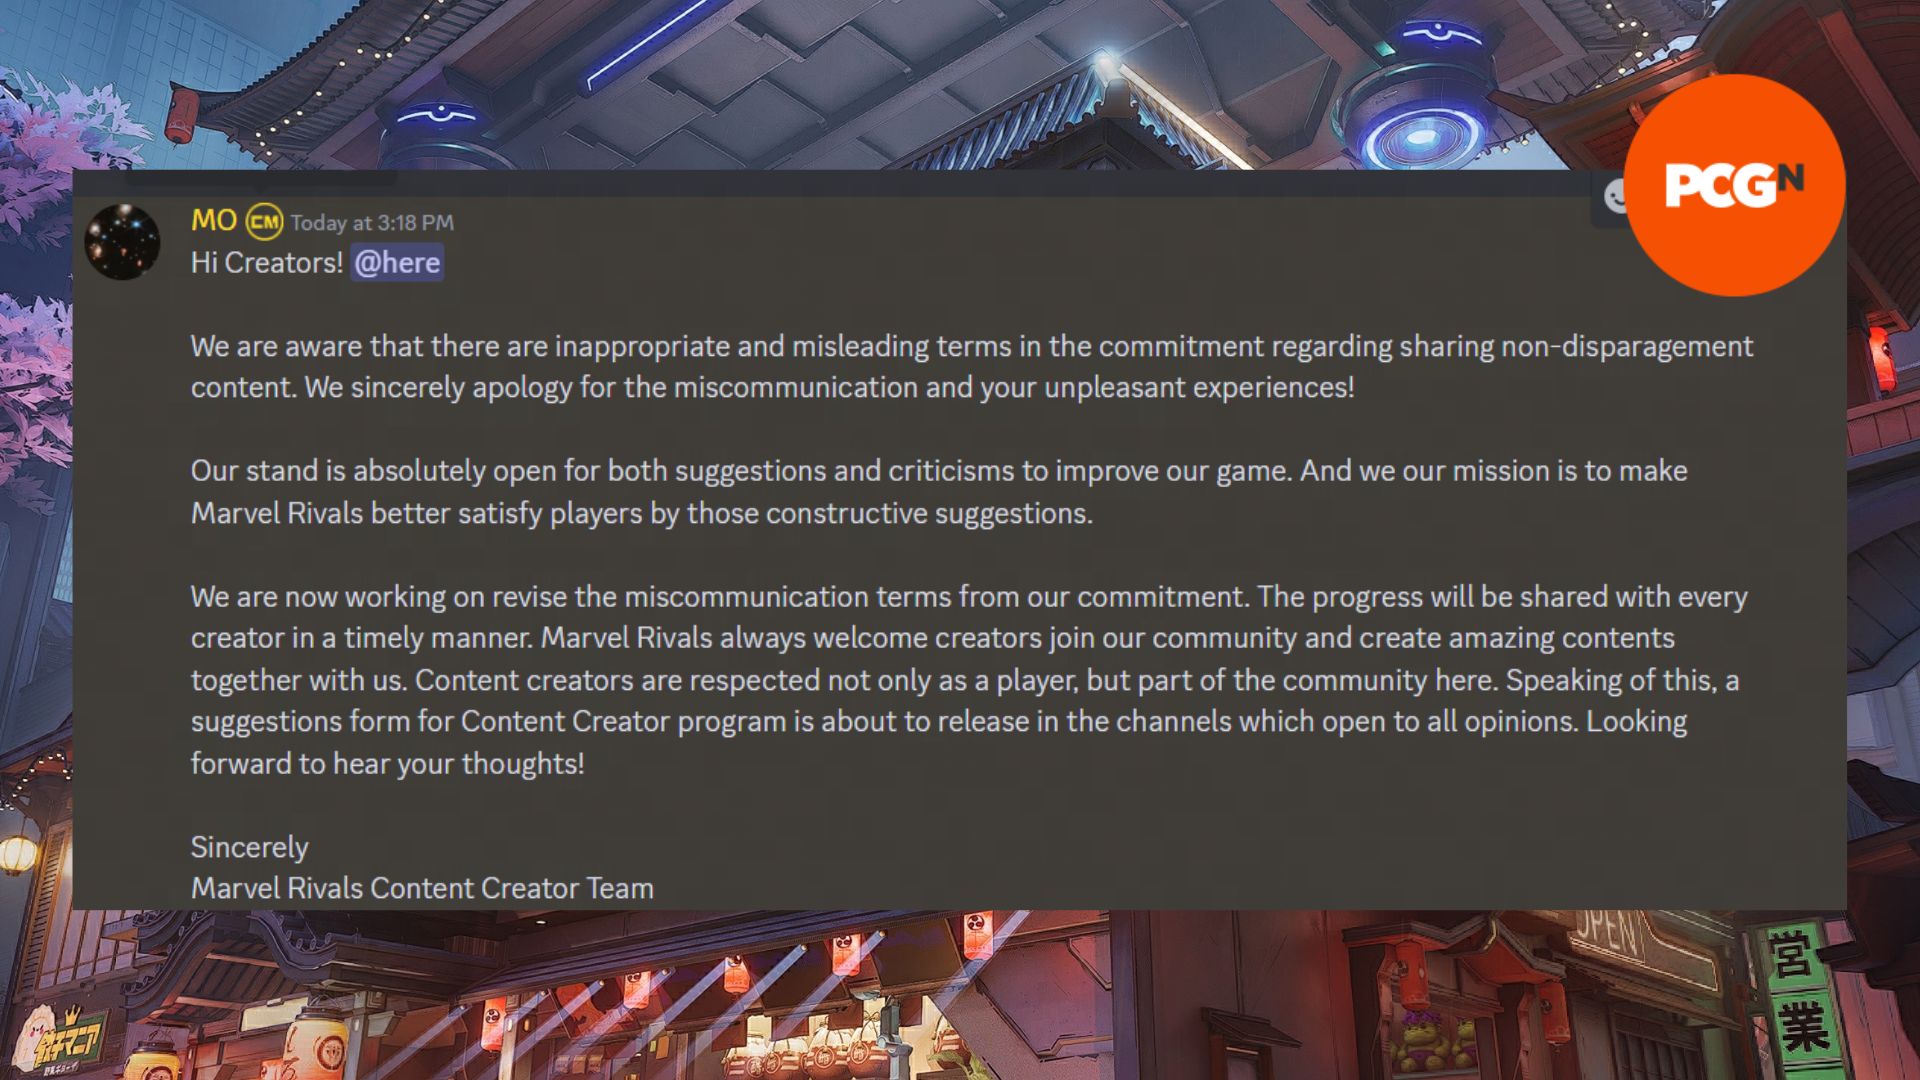 Marvel Rivals contract: a screenshot of a Discord post in the Marvel Rivals content creator section